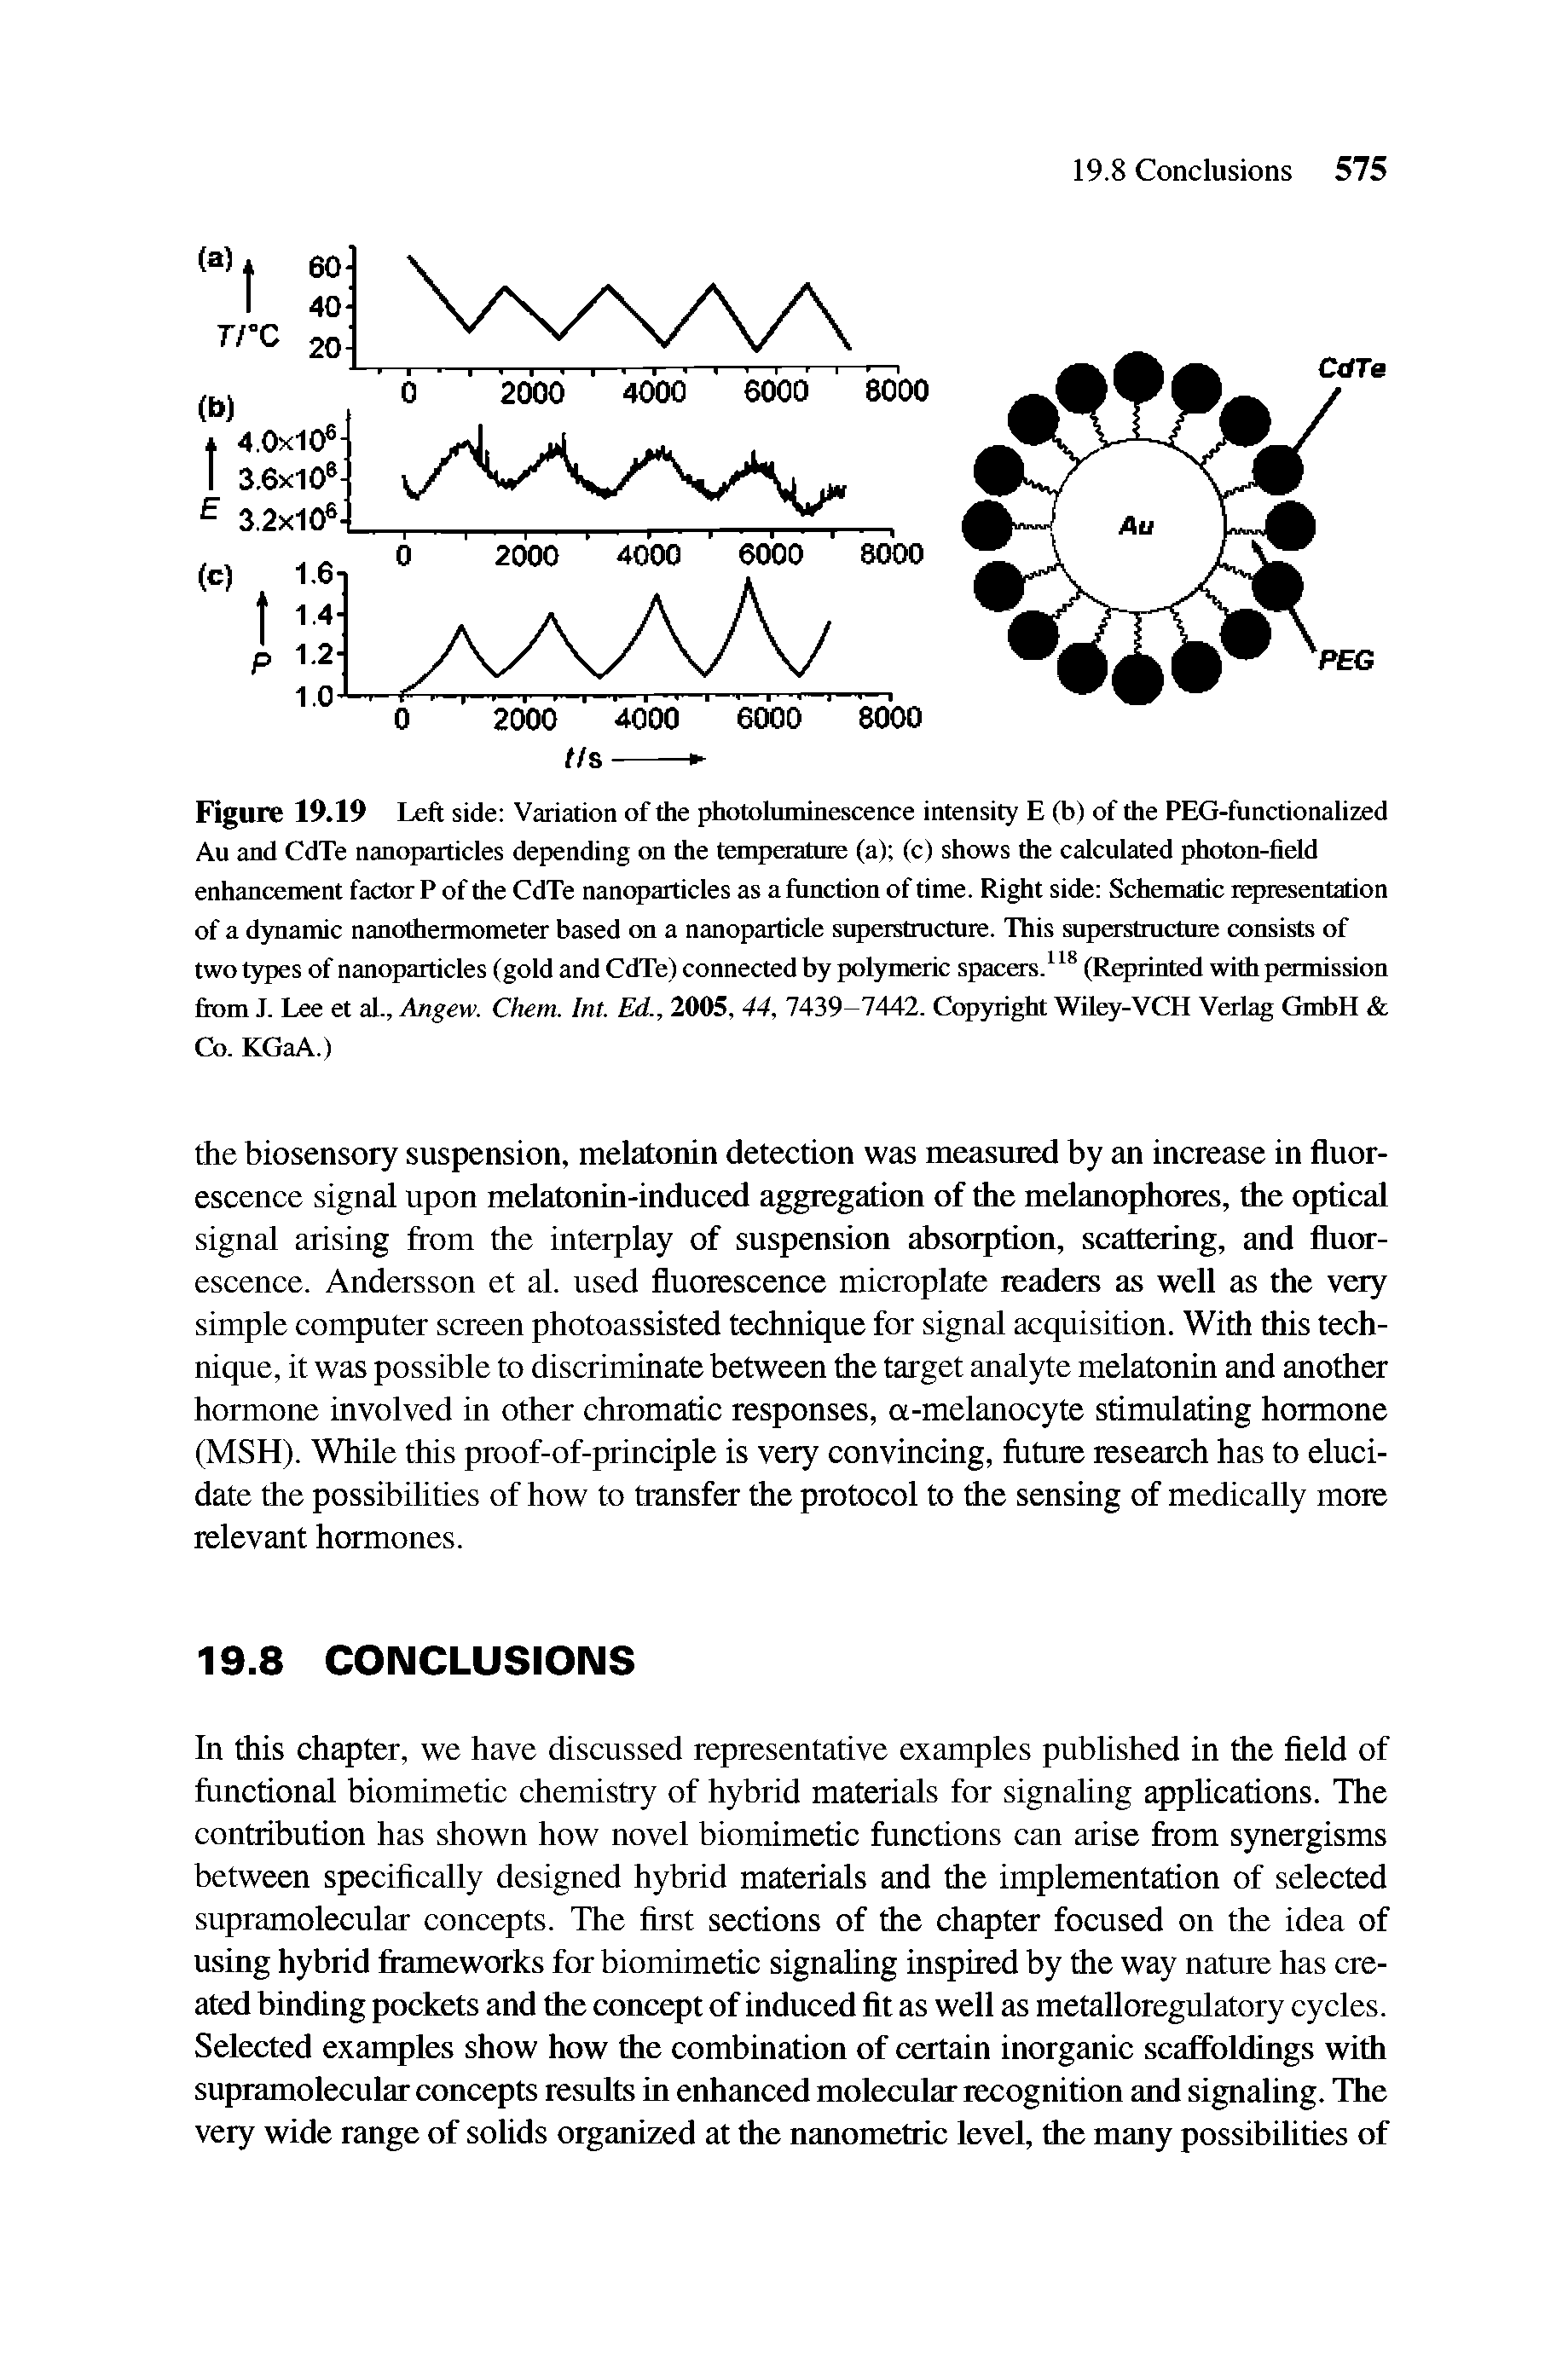 Figure 19.19 Left side Variation of the photoluminescence intensity E (b) of the PEG-functionalized Au and CdTe nanoparticles depending on the temperature (a) (c) shows the calculated photon-field enhancement factor P of the CdTe nanoparticles as a function of time. Right side Schematic representation of a dynamic nanothermometer based on a nanoparticle superstructure. This superstructure consists of two types of nanoparticles (gold and CdTe) connected by polymeric spacers.118 (Reprinted with permission from J. Lee et al., Angew. Chem. Int. Ed., 2005, 44, 7439-7442. Copyright Wiley-VCH Verlag GmbH Co. KGaA.)...